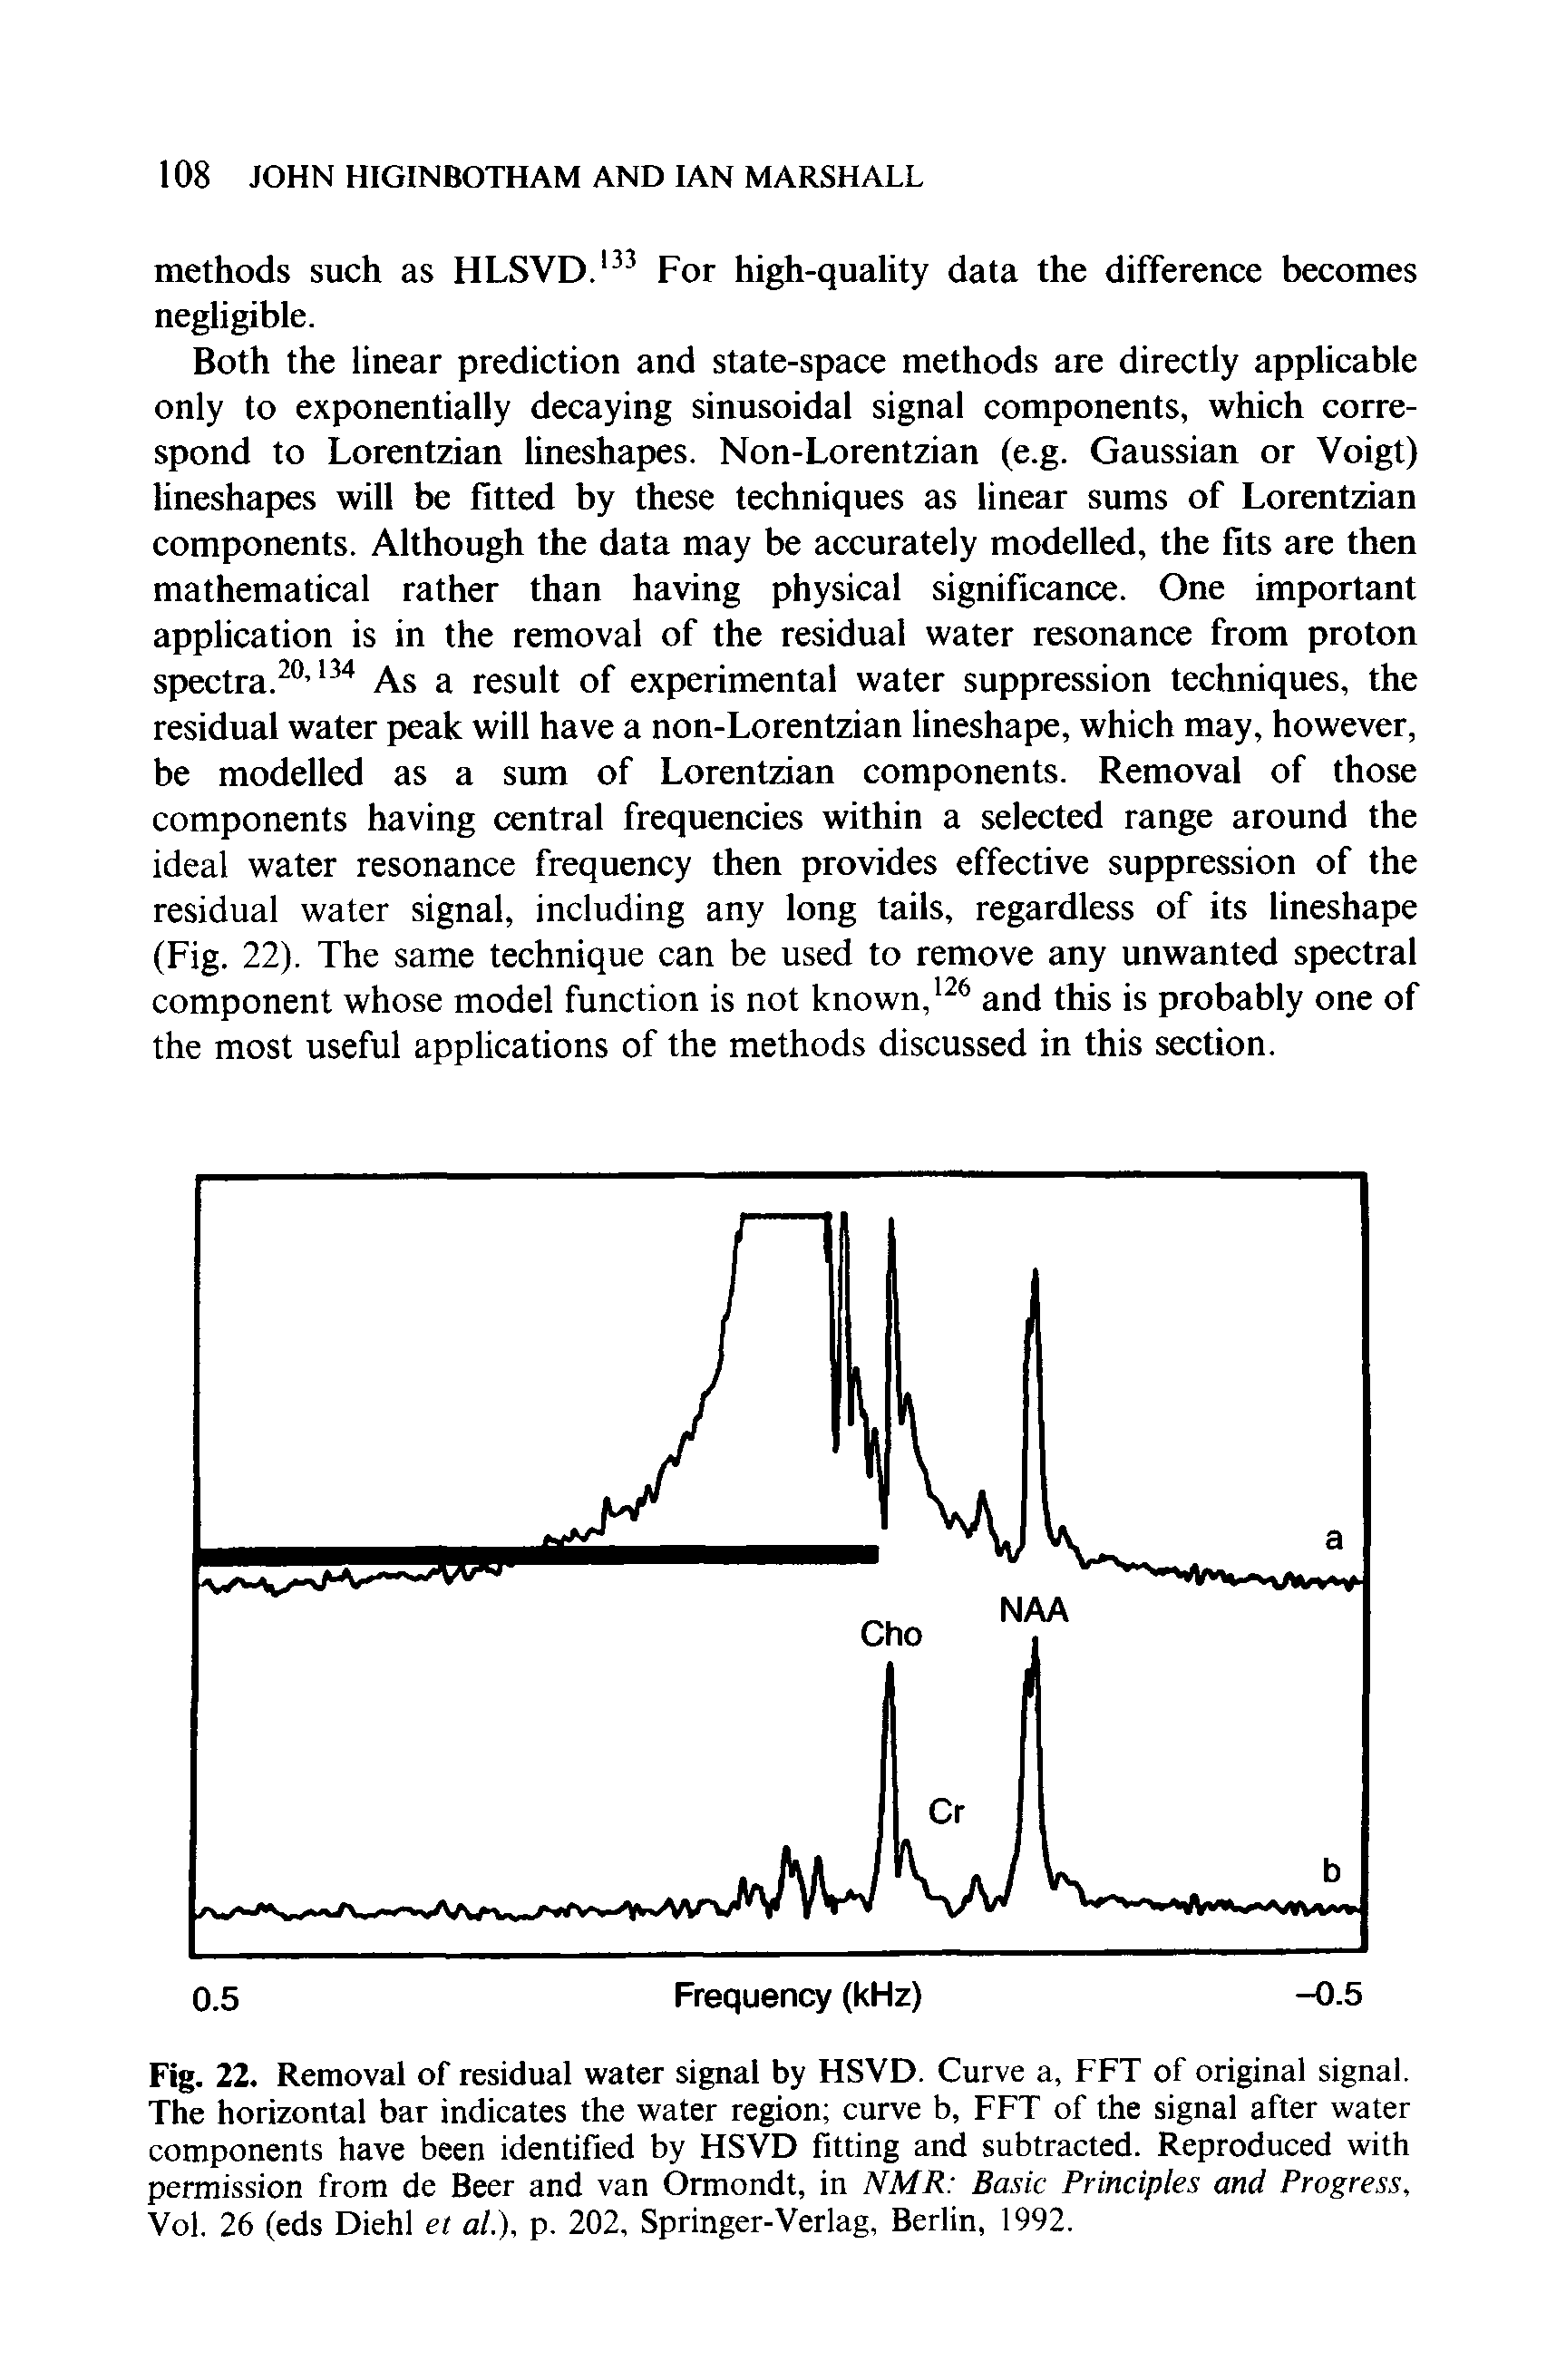 Fig. 22. Removal of residual water signal by HSVD. Curve a, FFT of original signal. The horizontal bar indicates the water region curve b, FFT of the signal after water components have been identified by HSVD fitting and subtracted. Reproduced with permission from de Beer and van Ormondt, in NMR Basic Principles and Progress, Vol. 26 (eds Diehl et at.), p. 202, Springer-Verlag, Berlin, 1992.